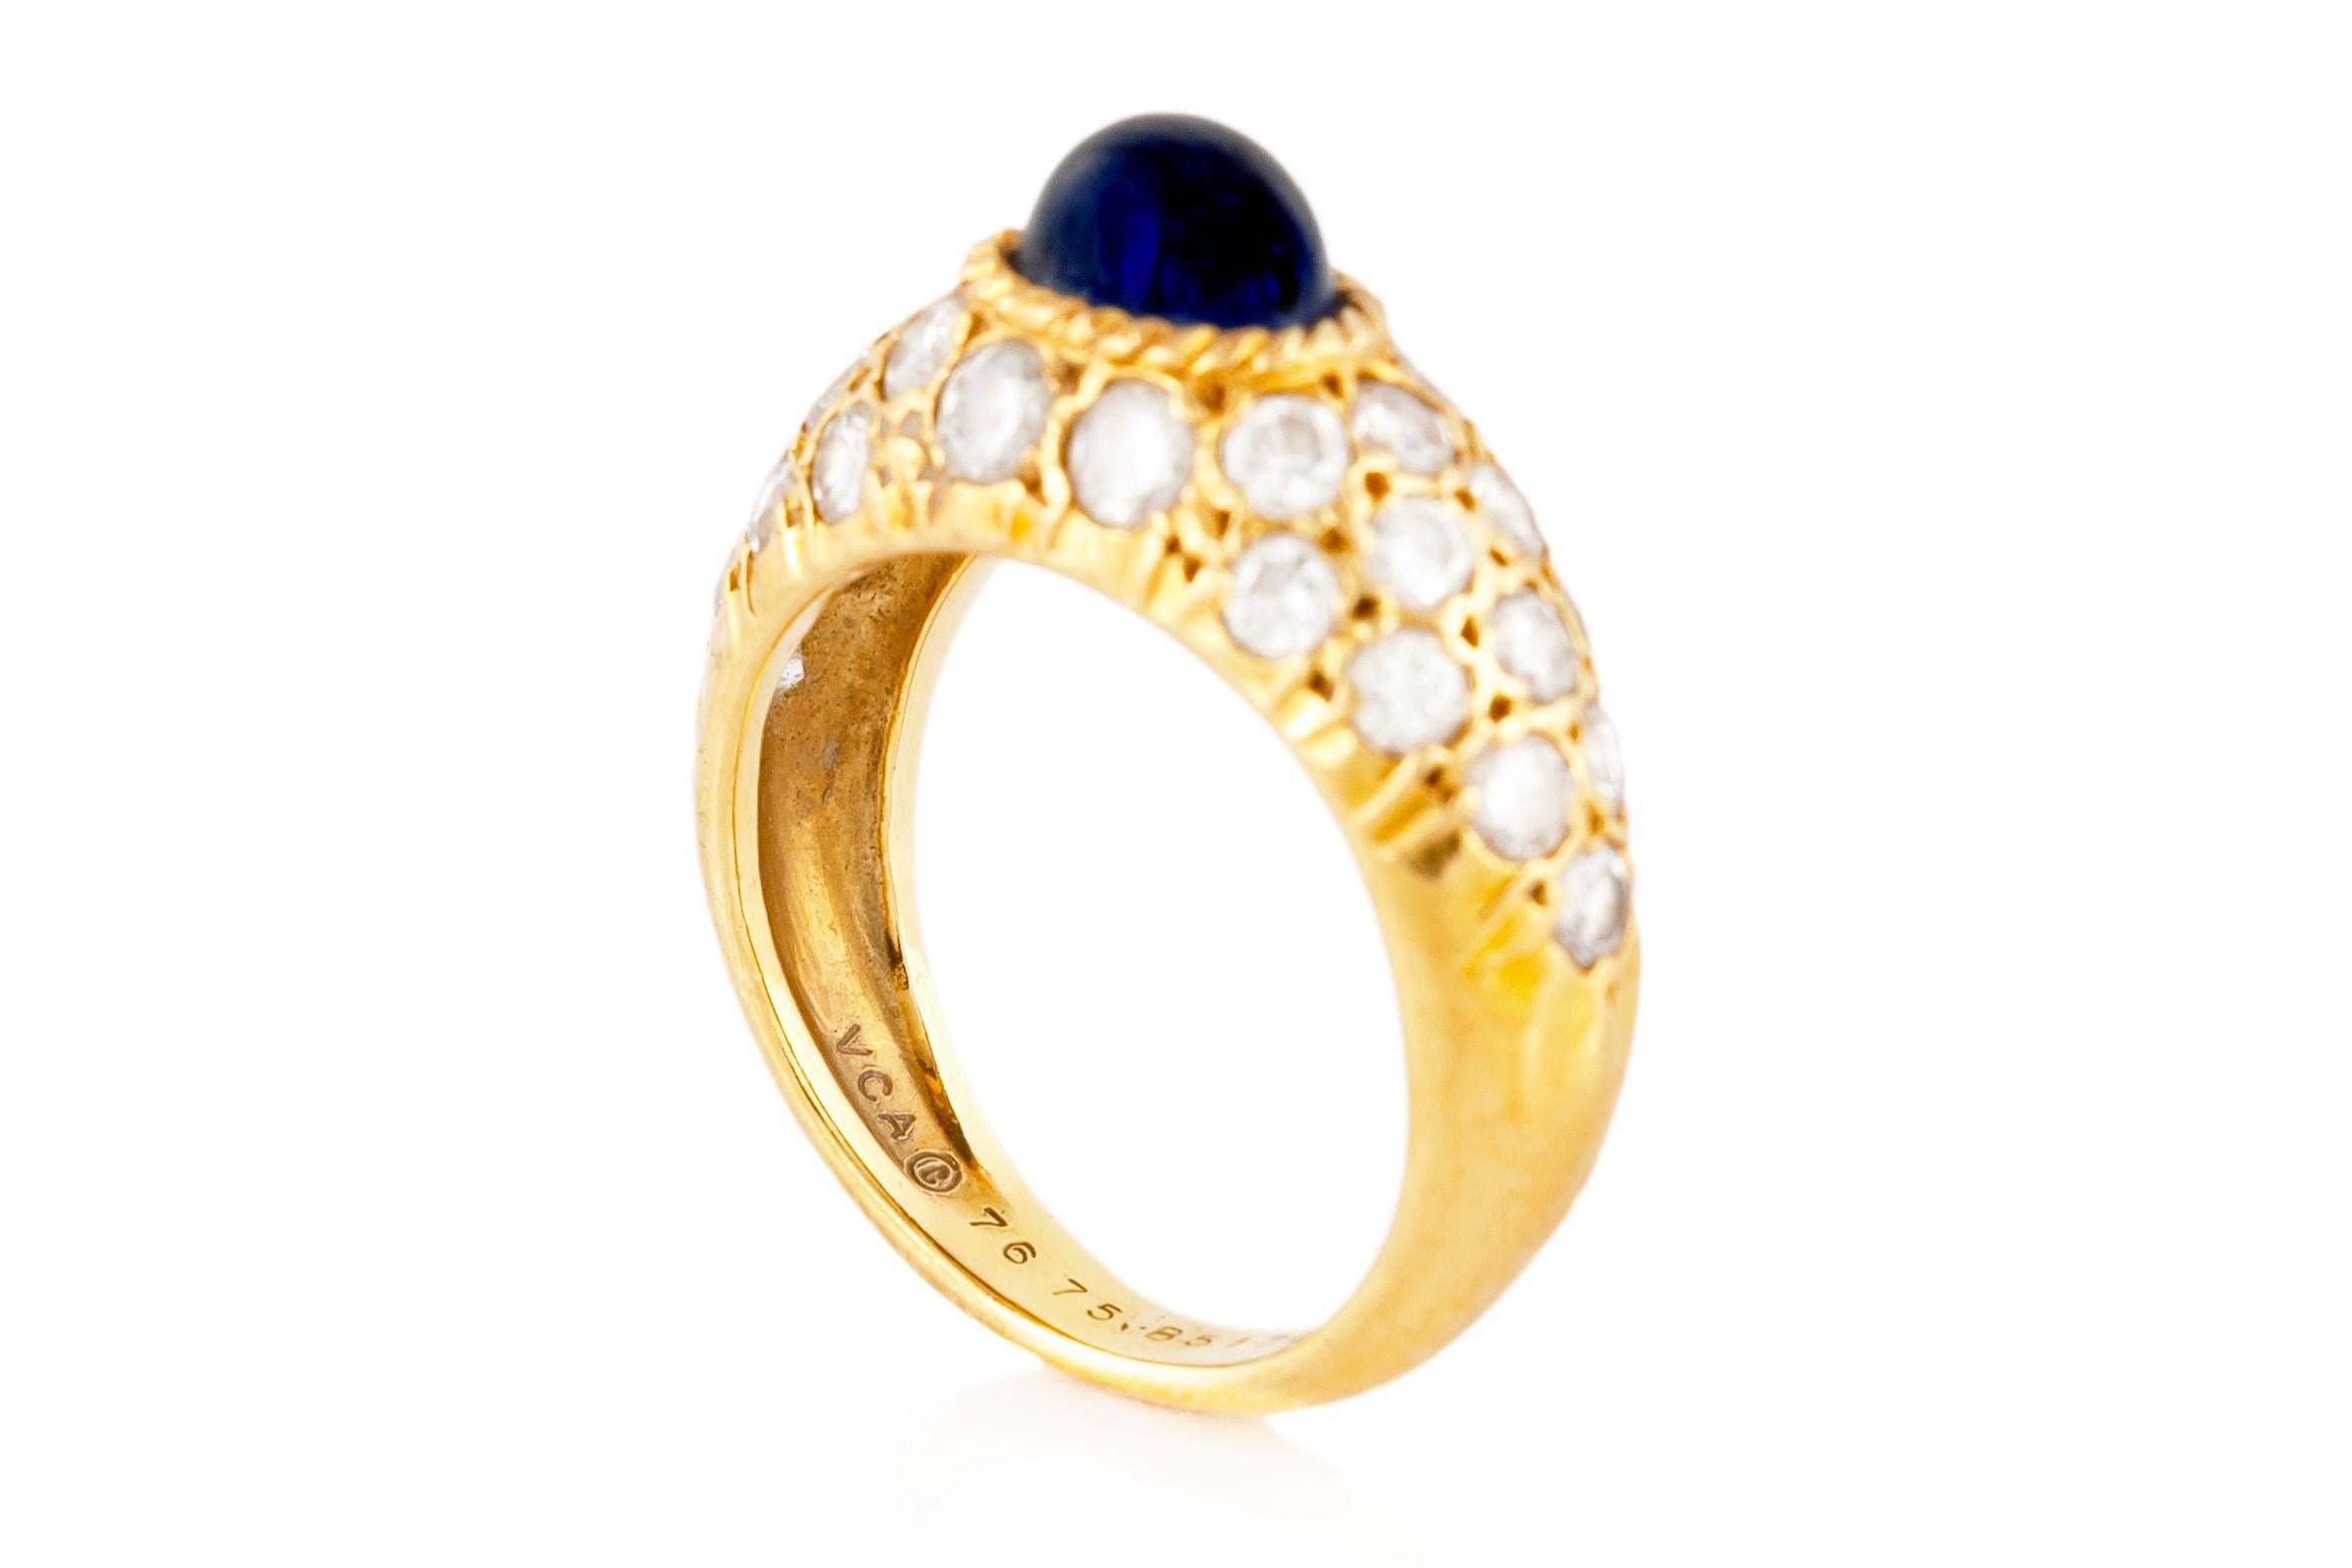 Women's Van Cleef & Arpels Cabochon Sapphire and Diamonds Pinky Ring